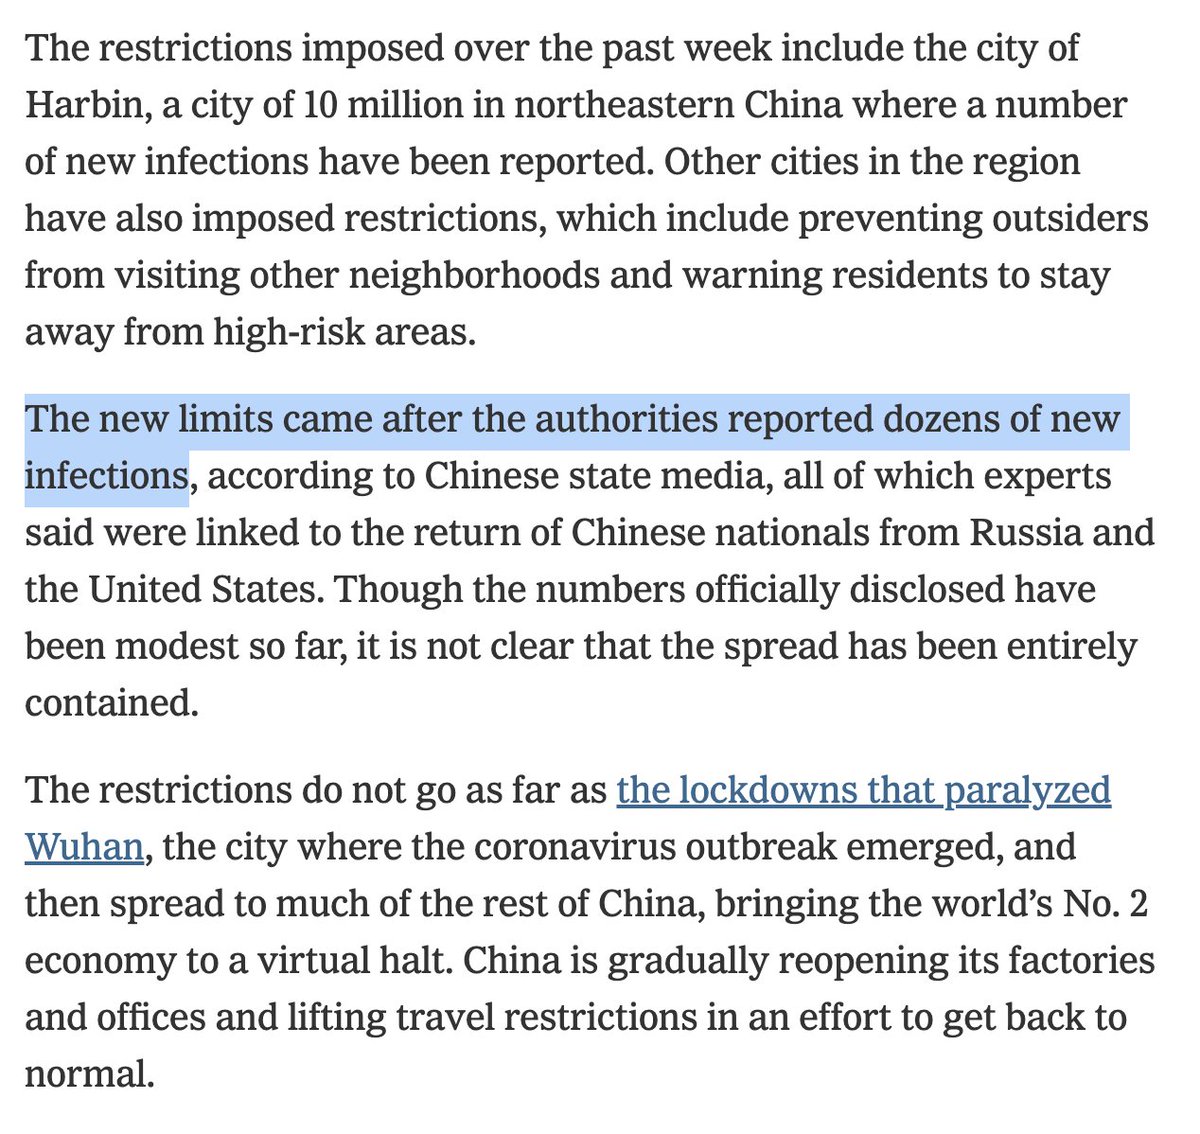 Thread with thoughts on the (still small?) new outbreak in China, as well as how they're adapting to a post-corona world.First, the Harbin outbreak is claimed to have been triggered by return migration, and detected at the level of dozens of cases. http://archive.is/LBKzy   https://twitter.com/balajis/status/1252021771919712256